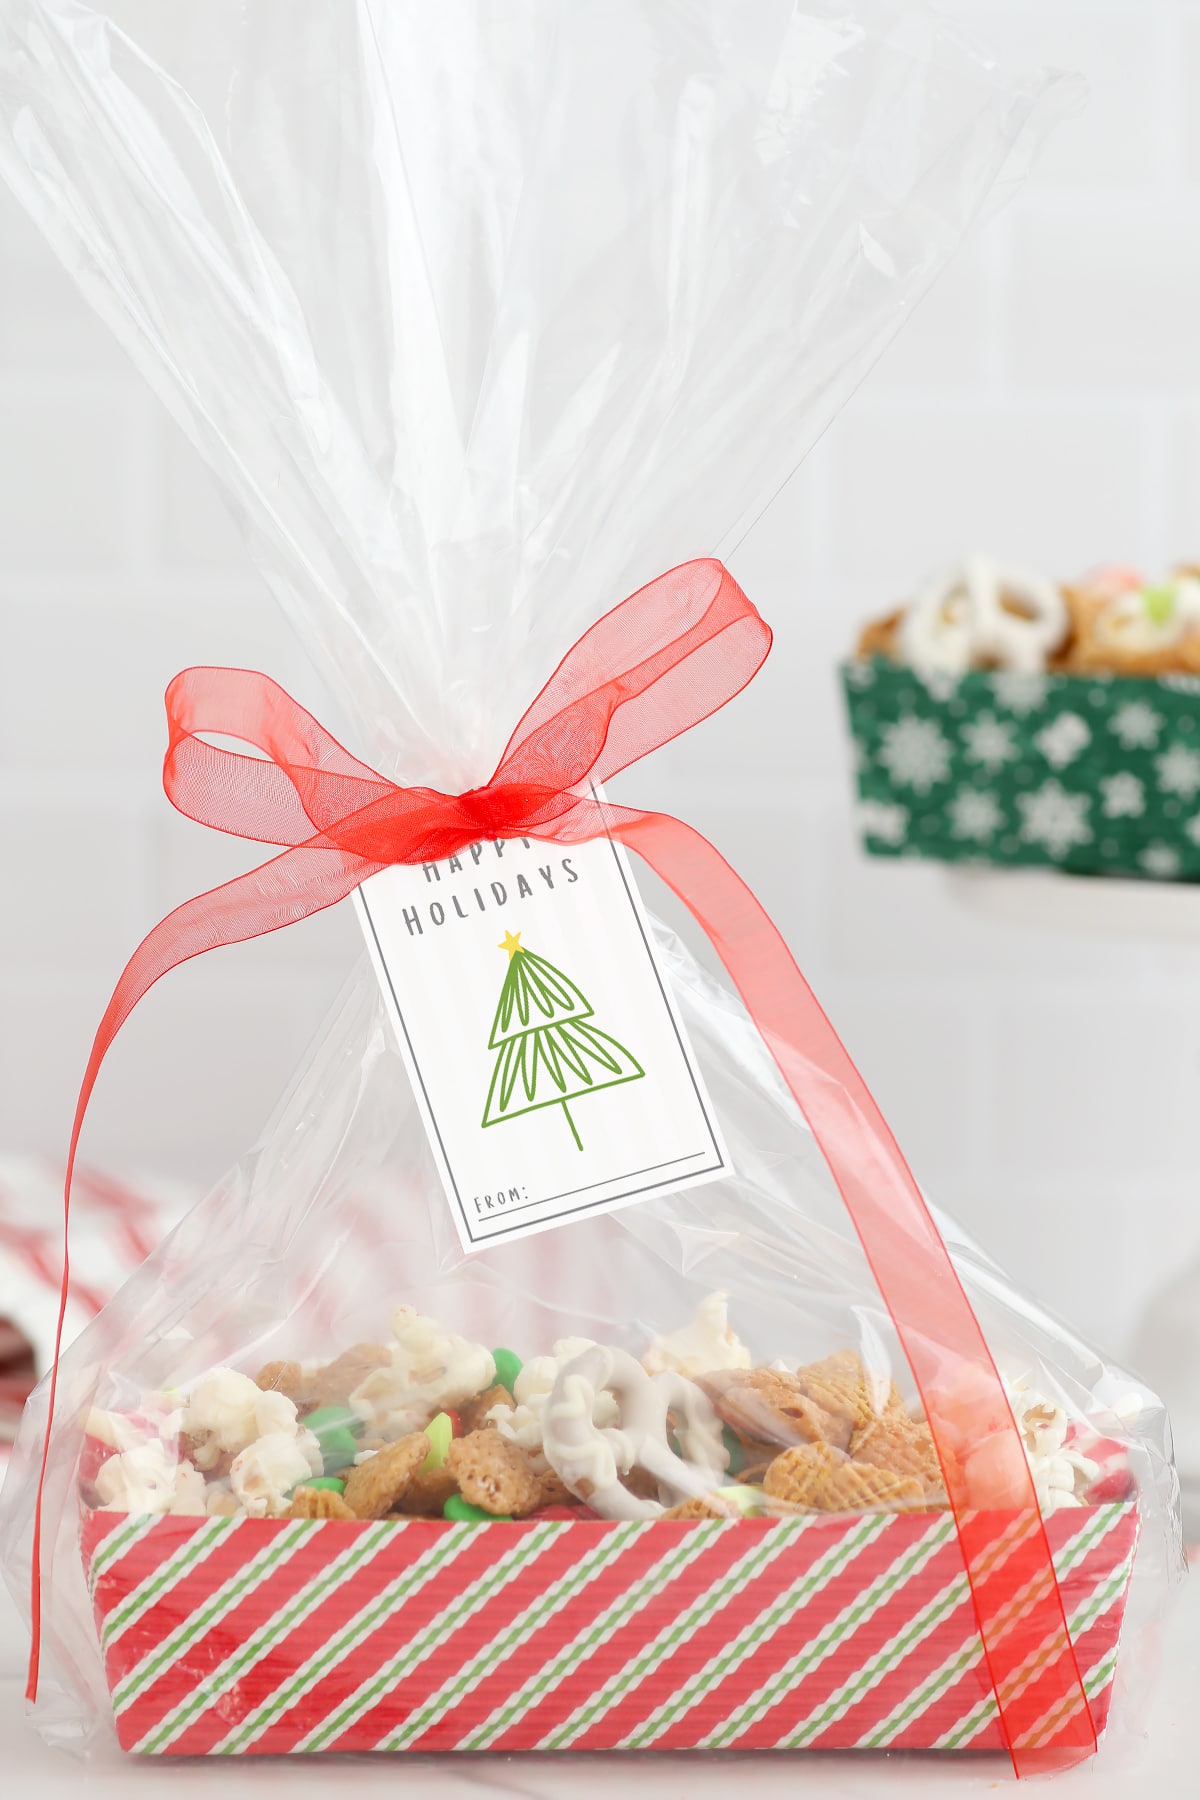 Christmas Snack Mix in a striped gifting box tied with a ribbon and a printable gift tag.